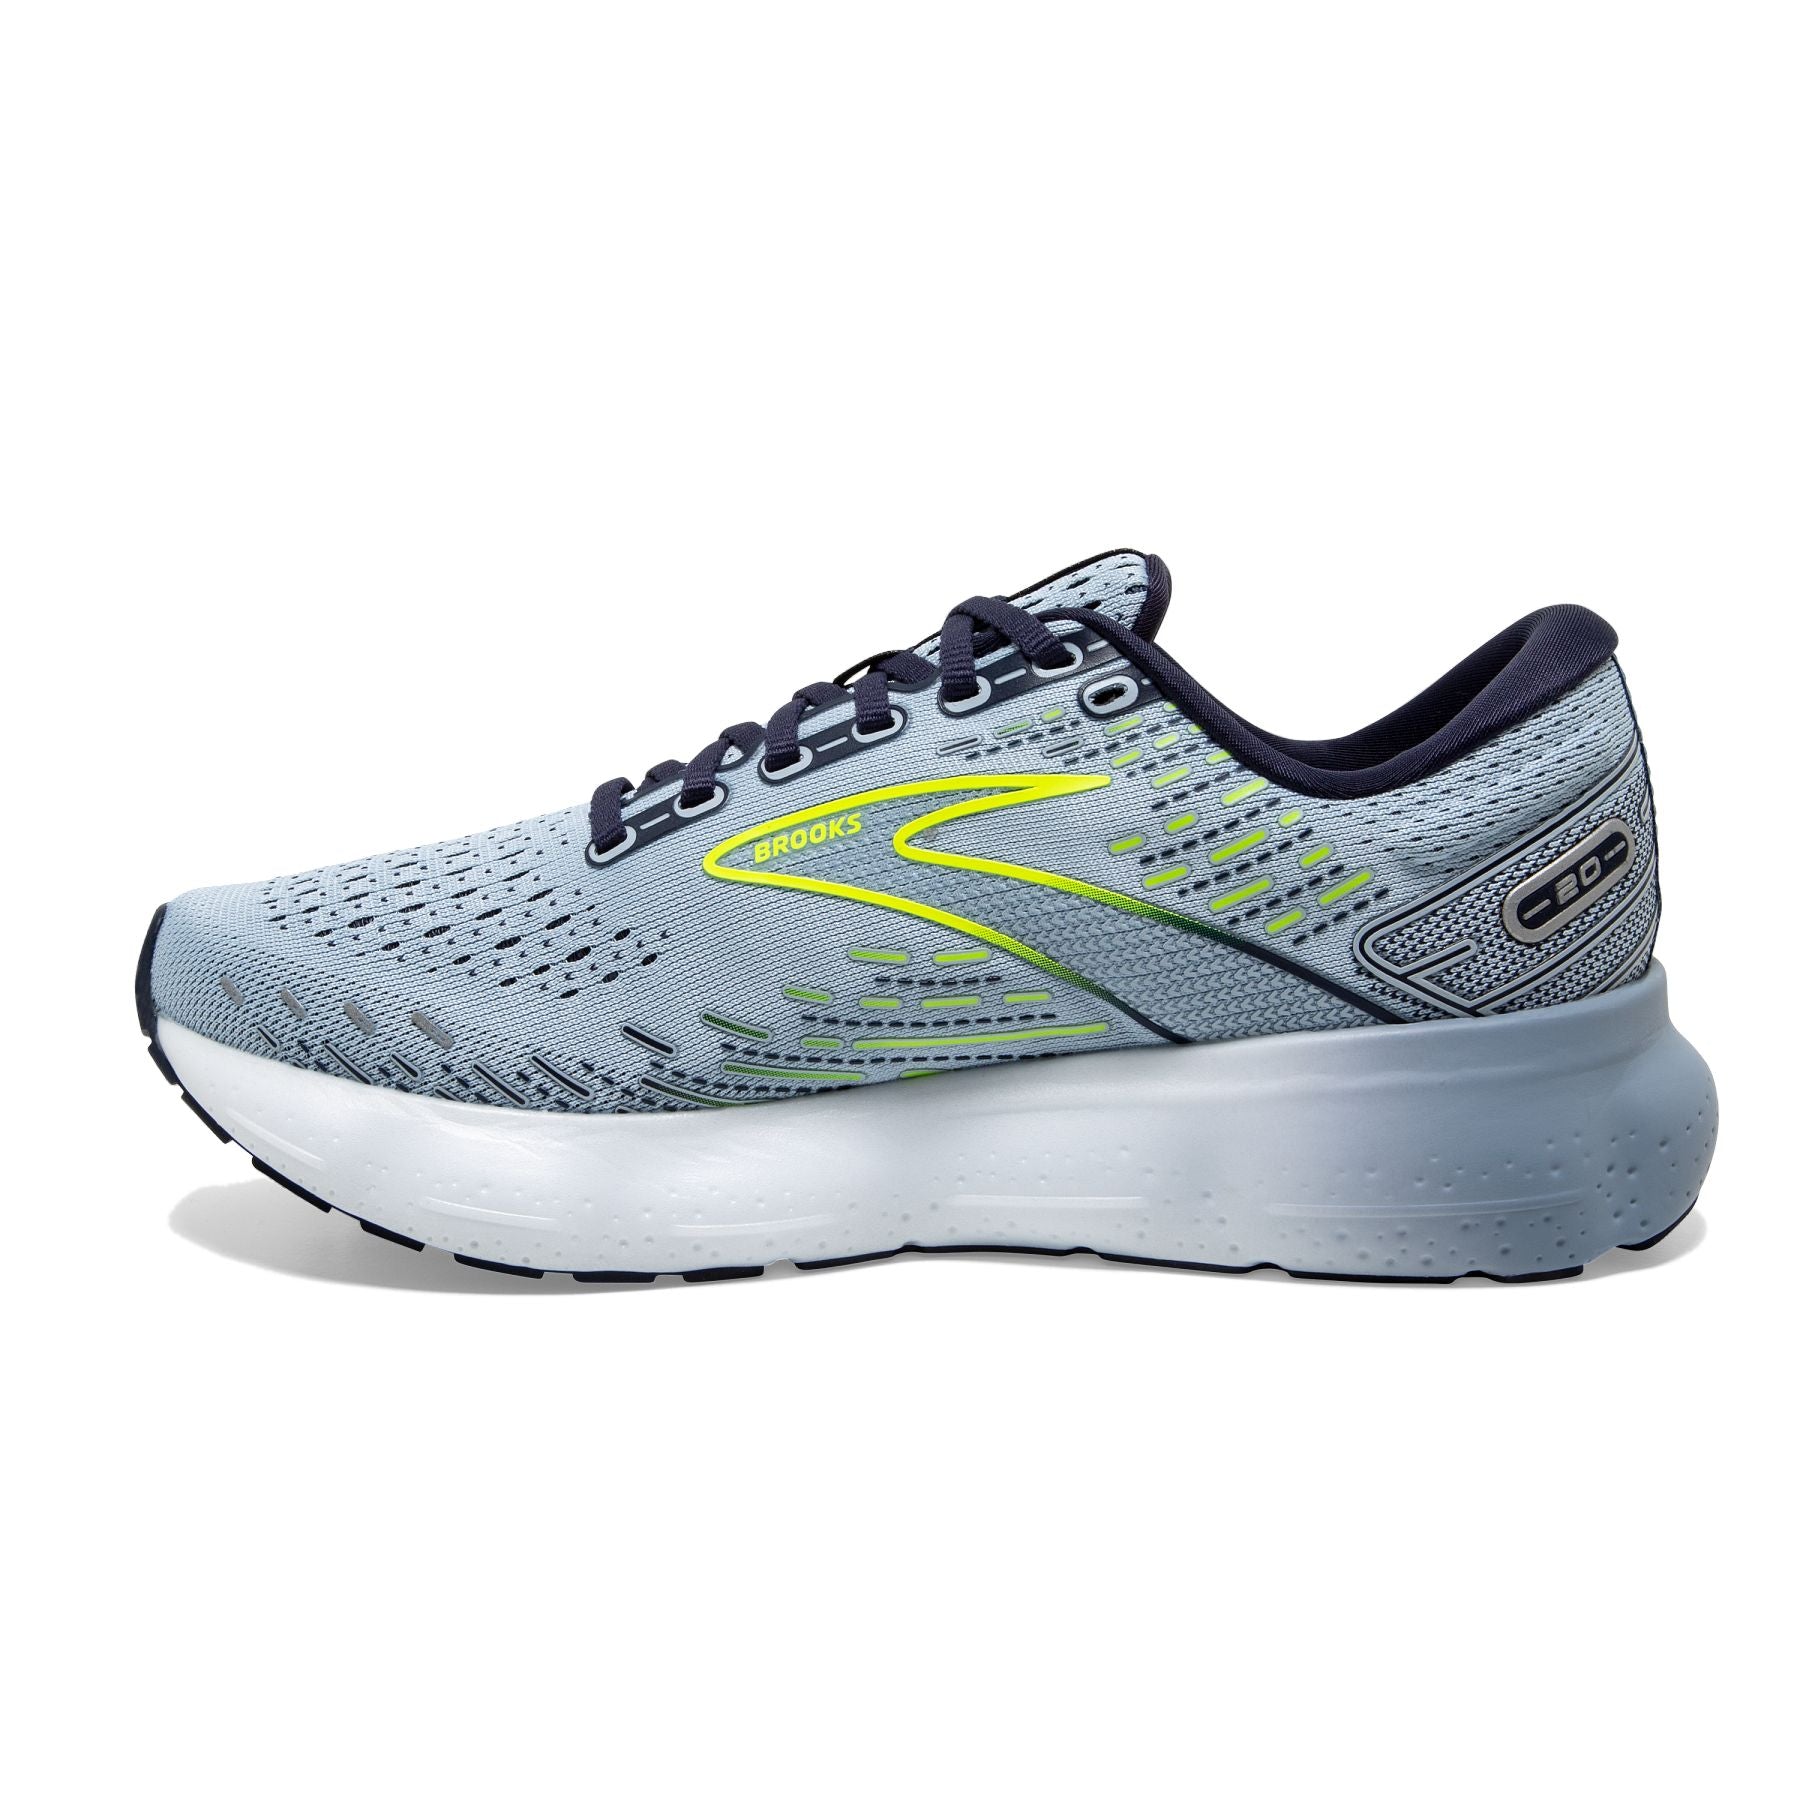 Medial view of the Women's Glycerin 20 in the color Light Blue/Peacoat/Nightlife